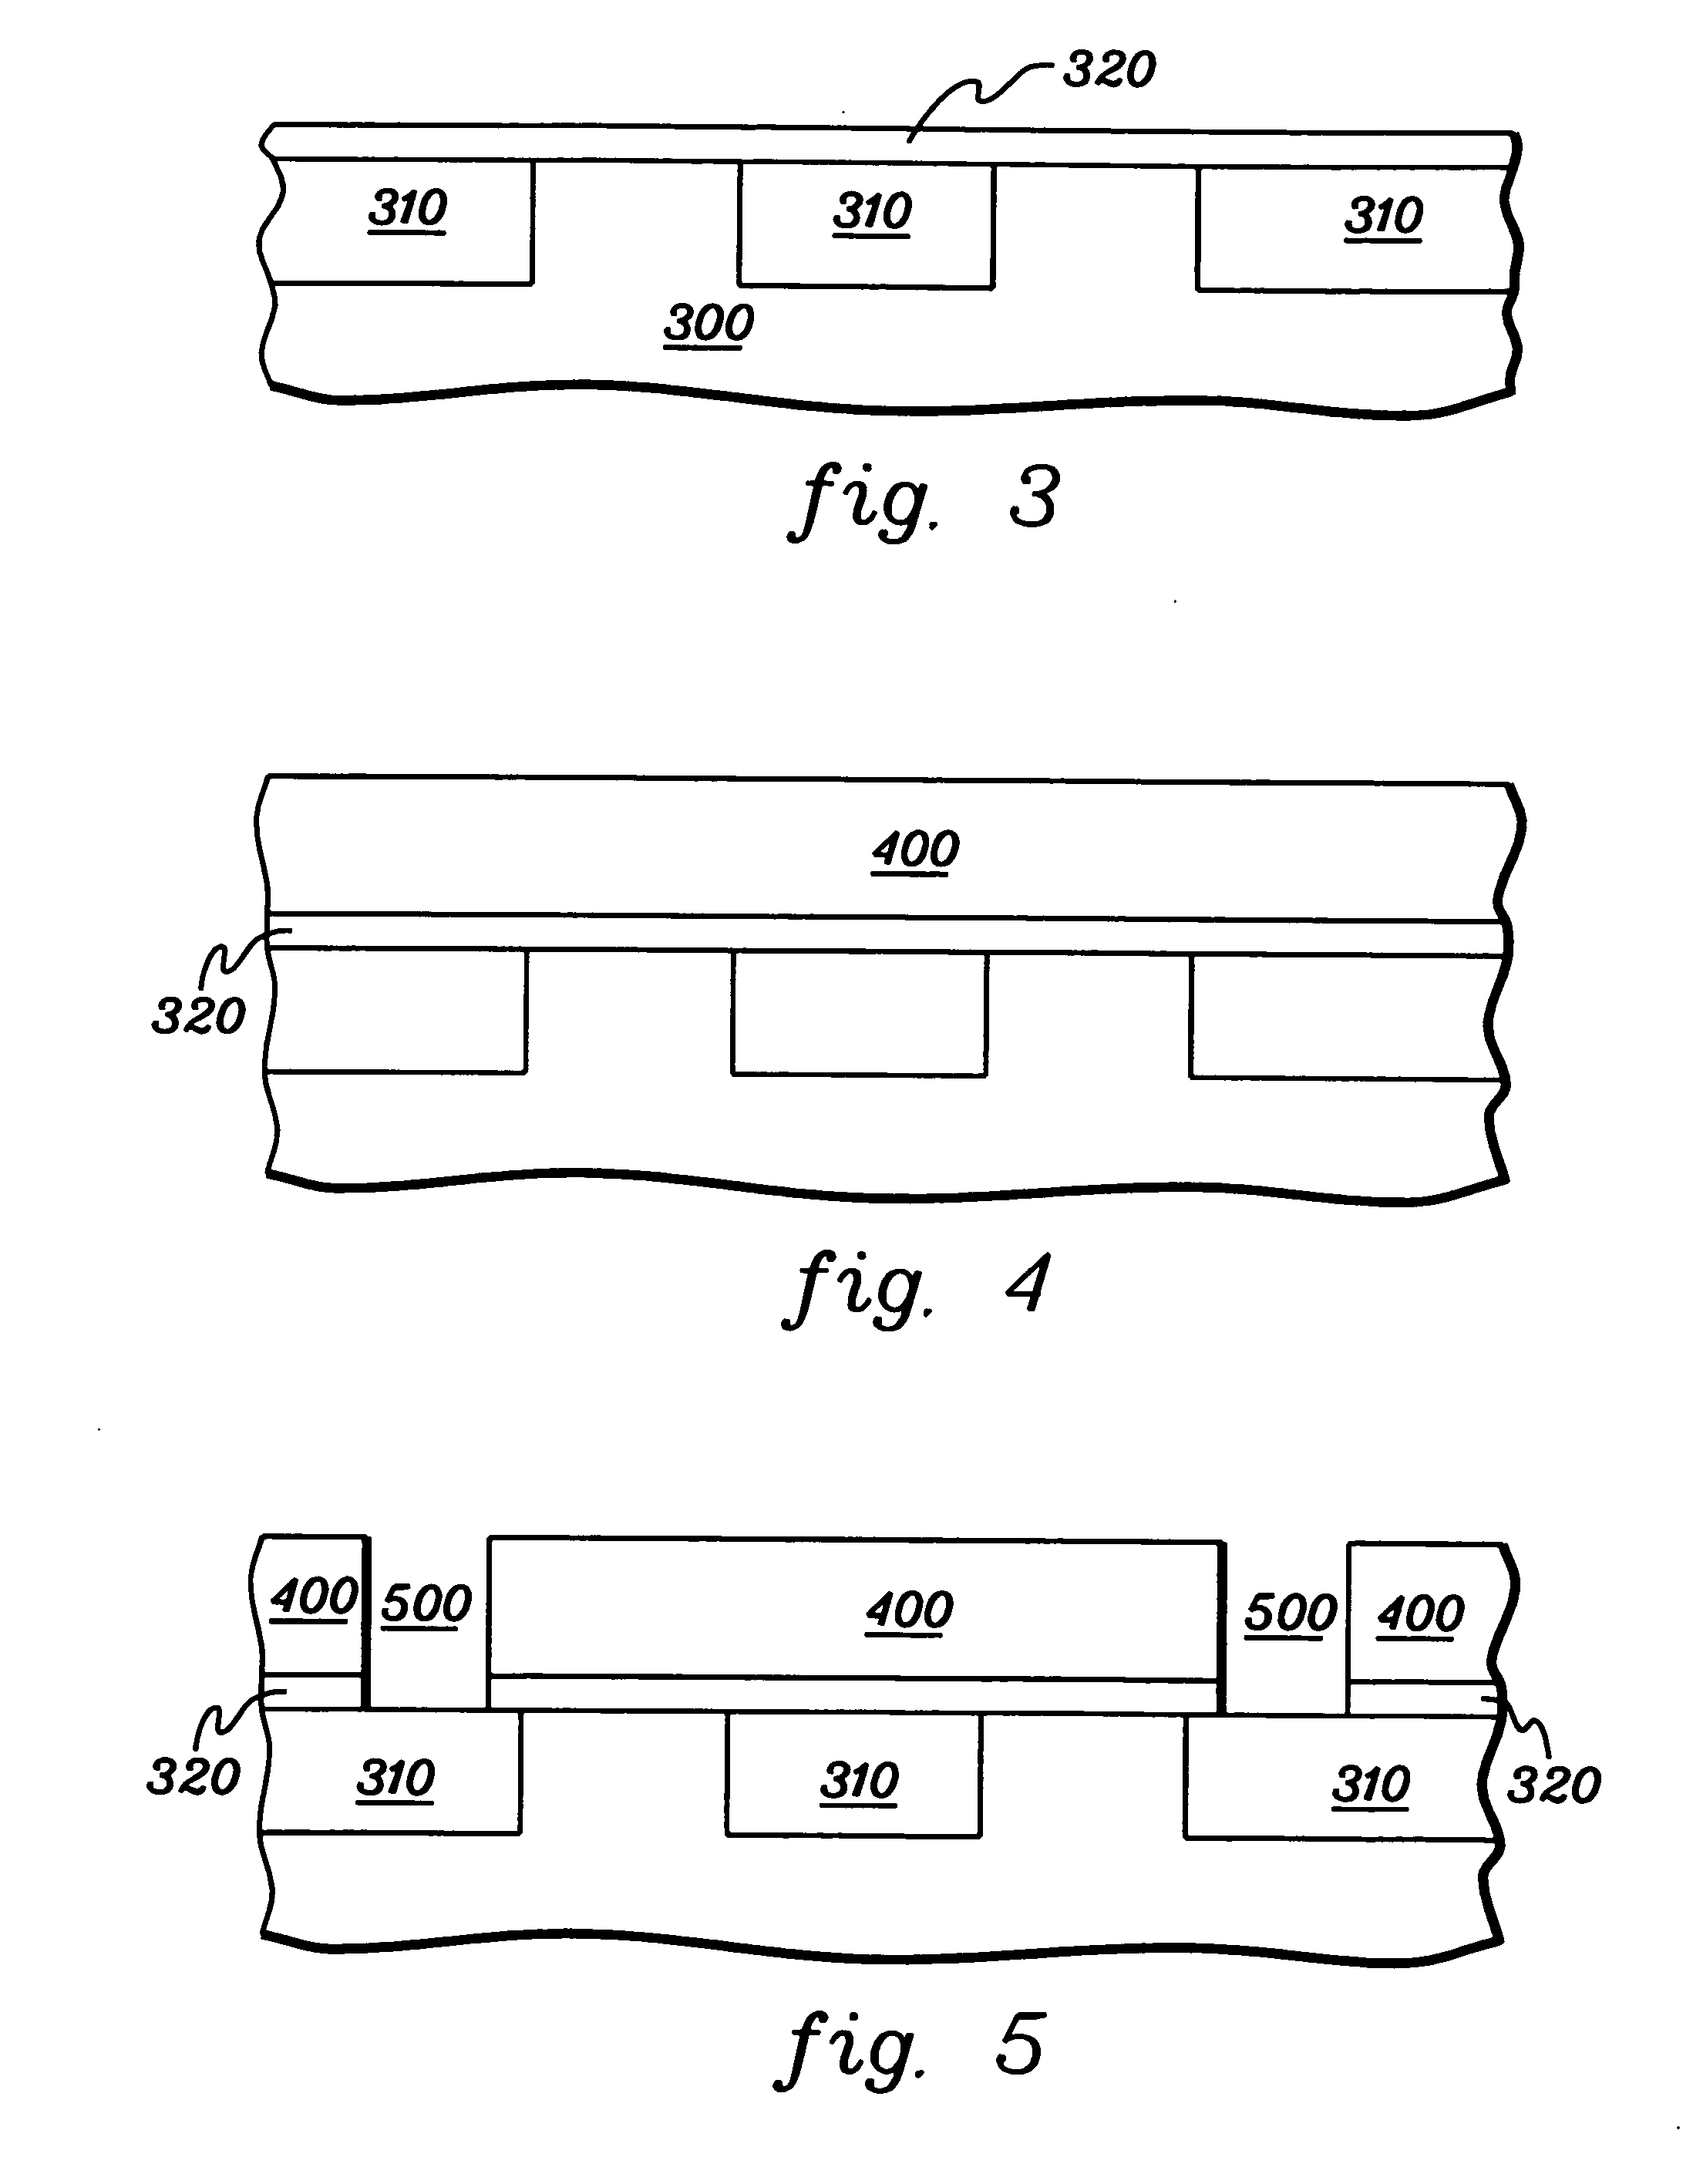 Electronic fuse with conformal fuse element formed over a freestanding dielectric spacer